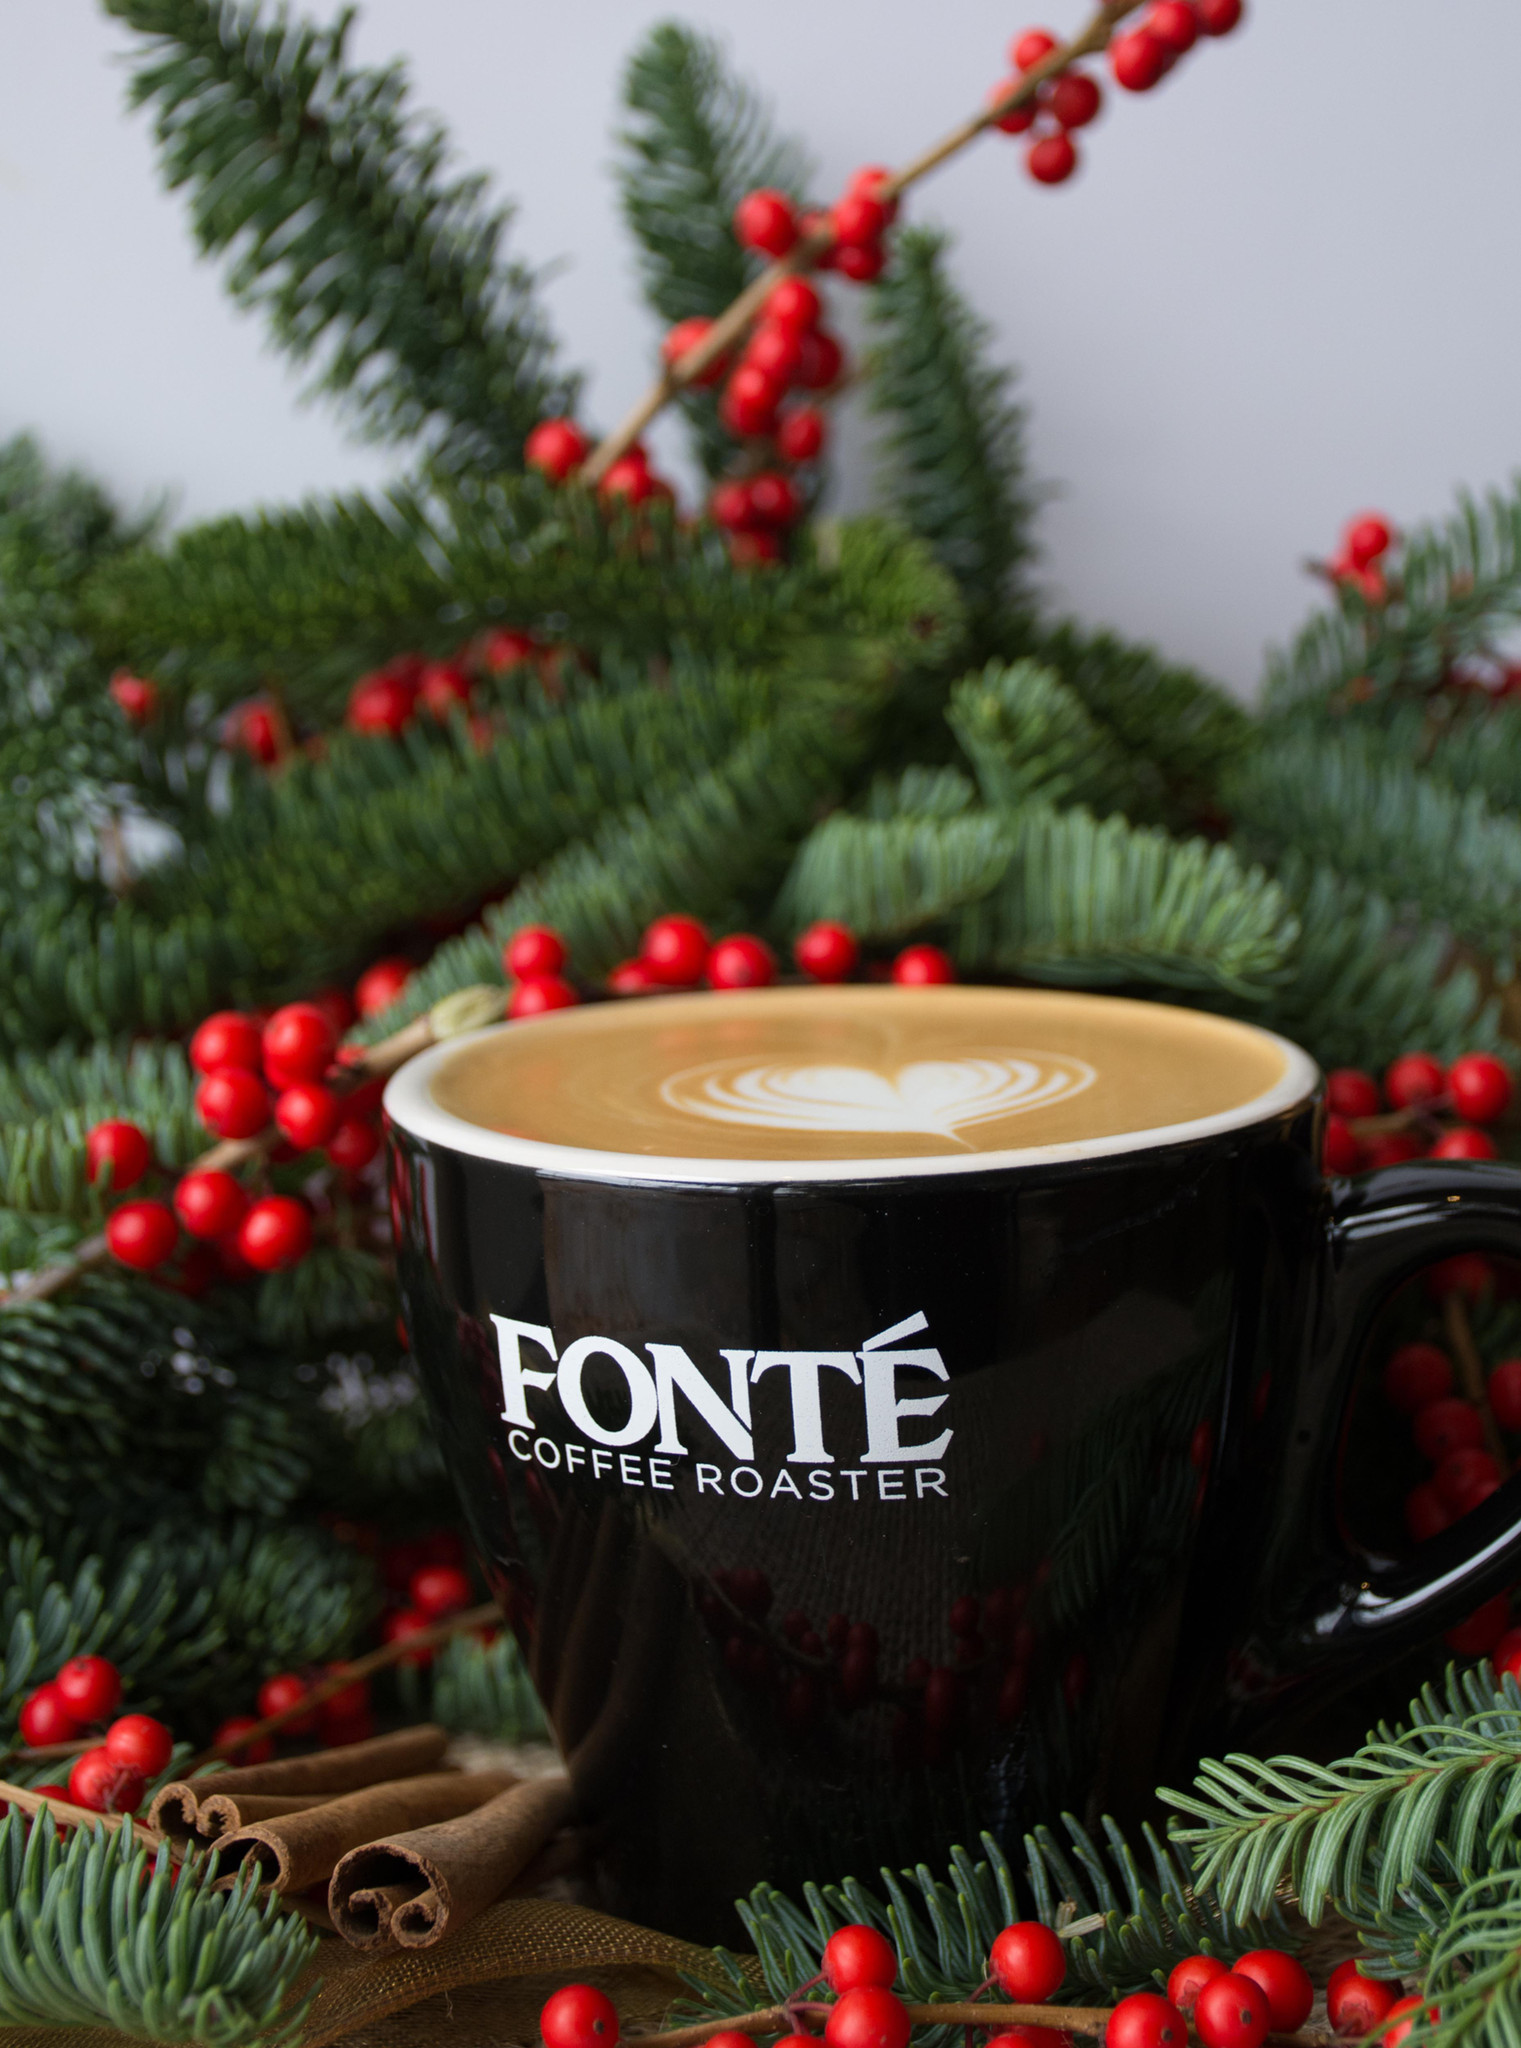 Fonte holiday blend product page background image "Merry Christmas" Christmas 2023